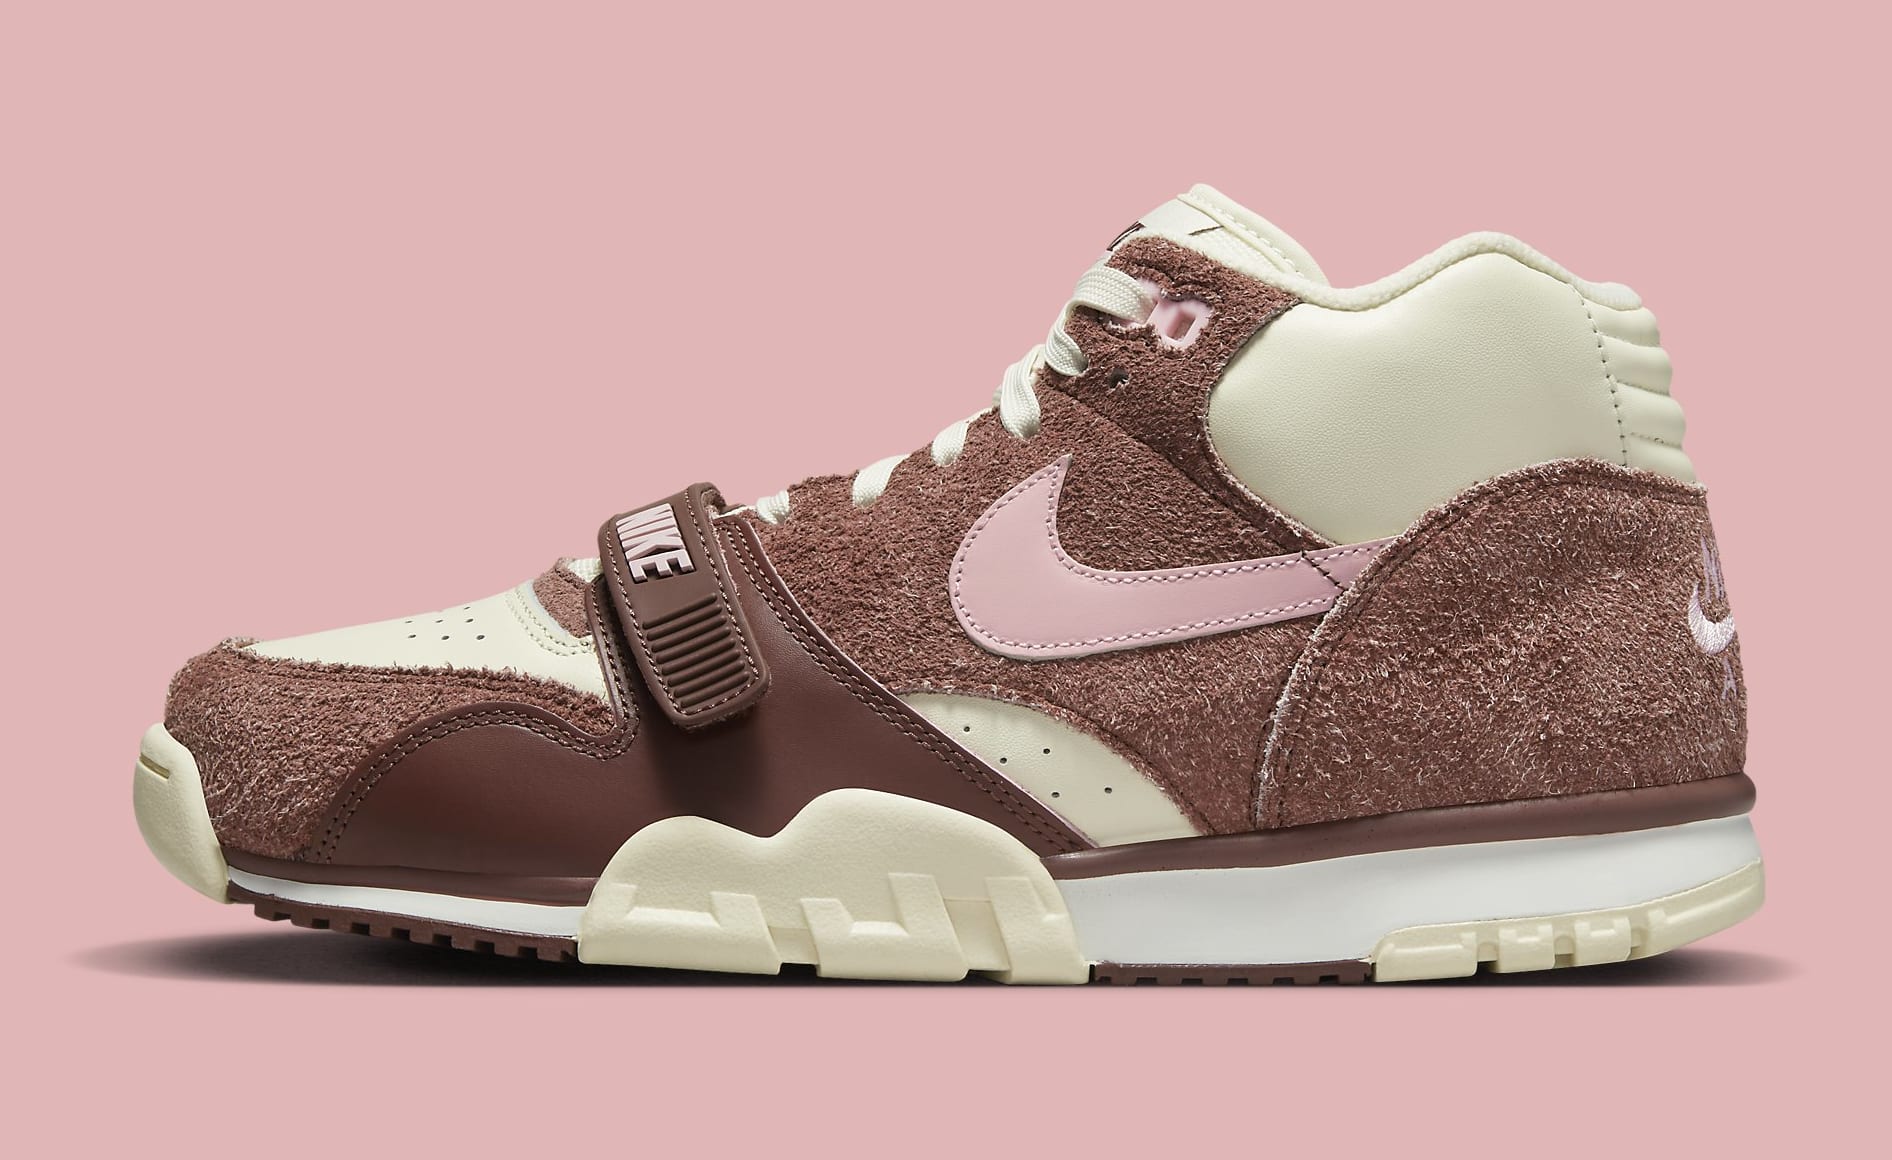 Nike Air Trainer 1 'Valentine's Day 2023' DM0522 201 Lateral